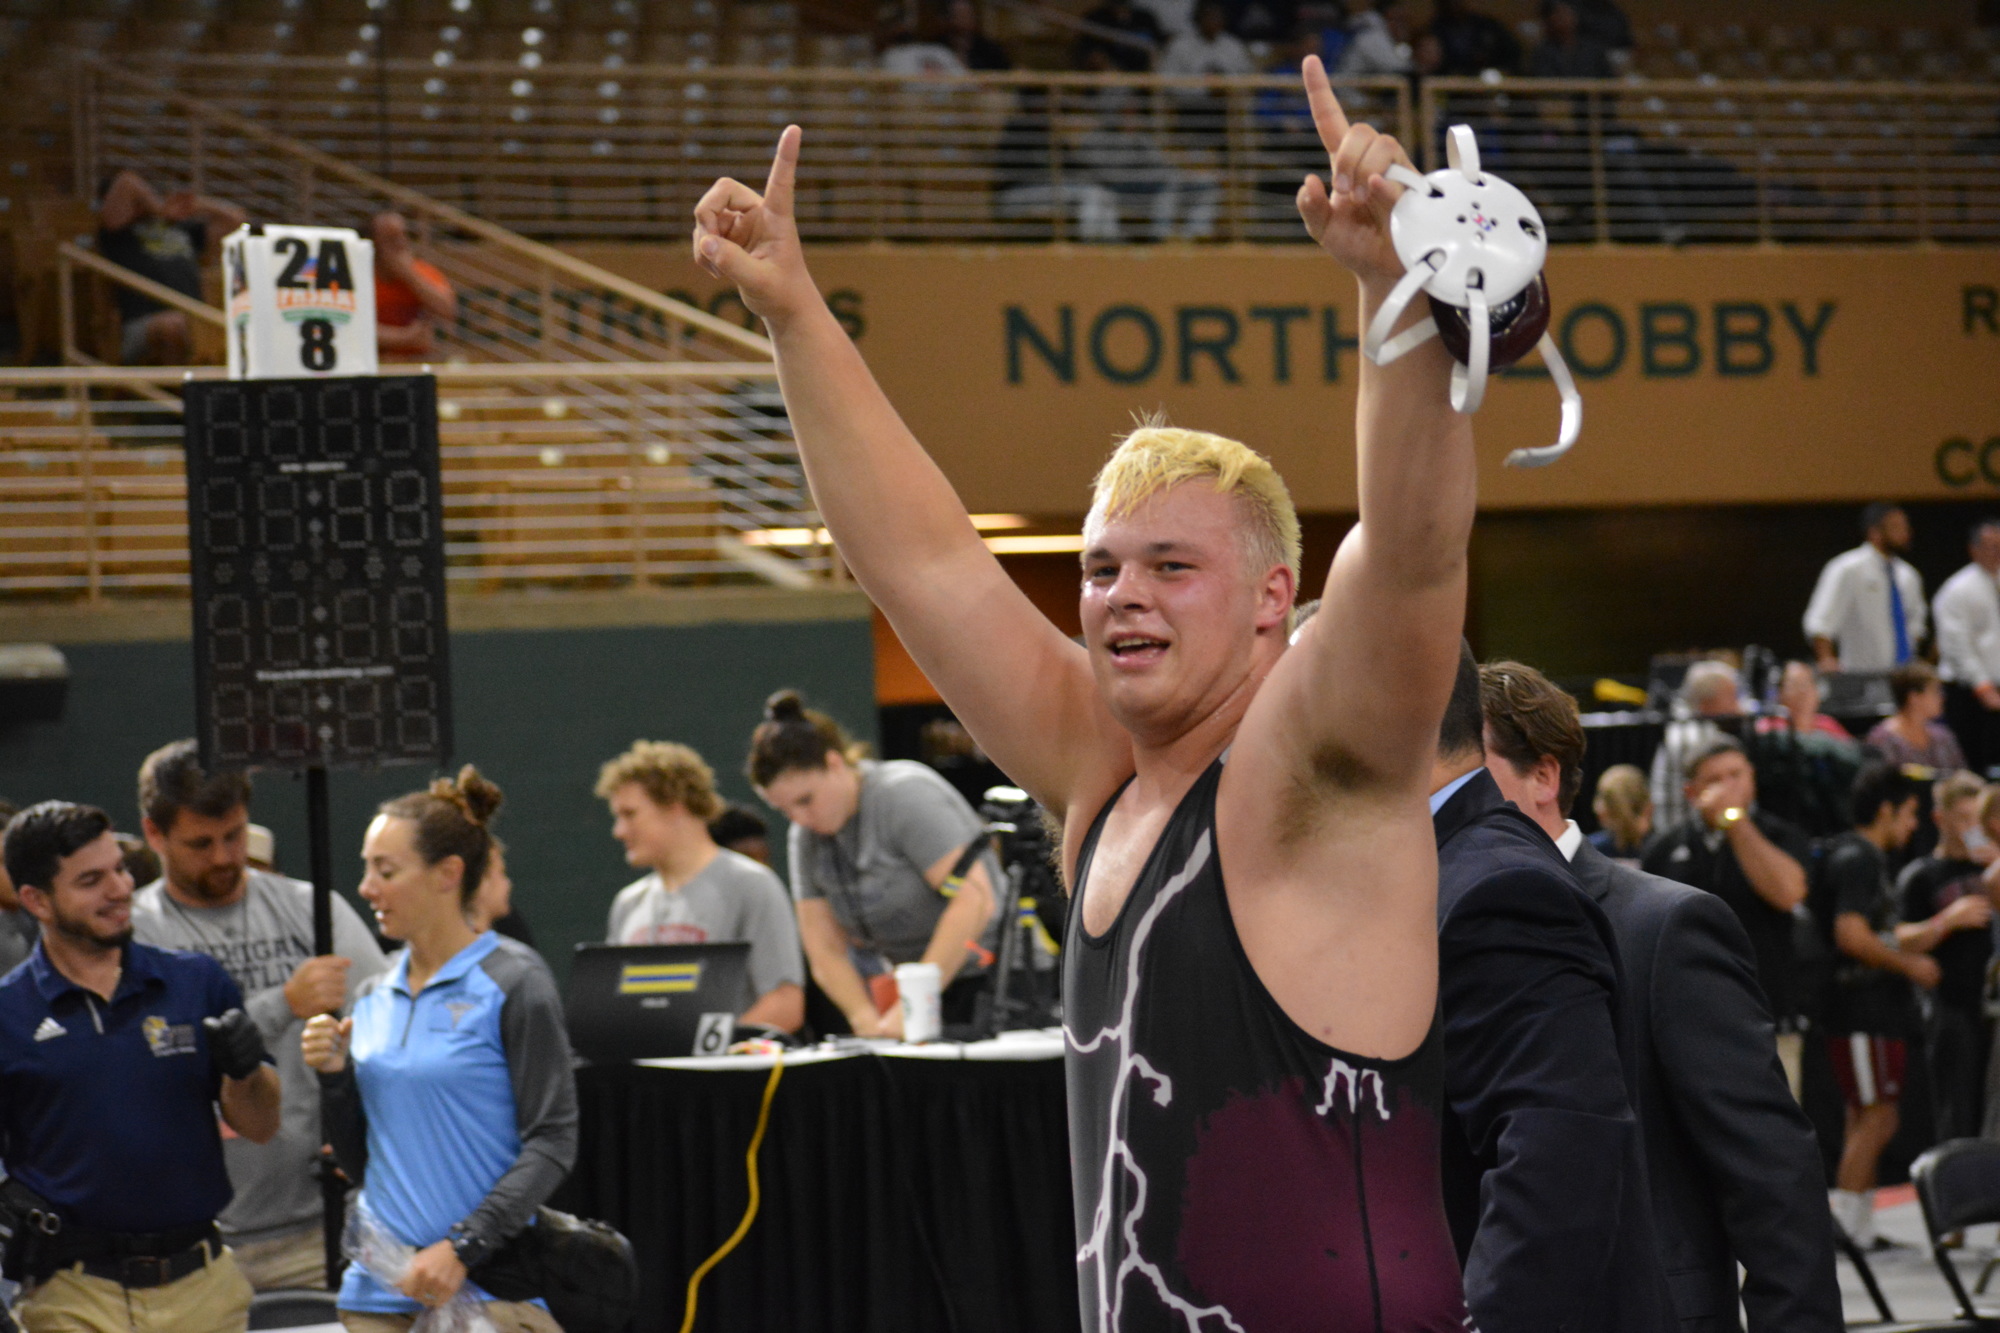 Brendan Bengtsson won the 2018 wrestling state title (285-pound class) while at Braden River High. Bengtsson said he has not forgotten the final moments of the match.